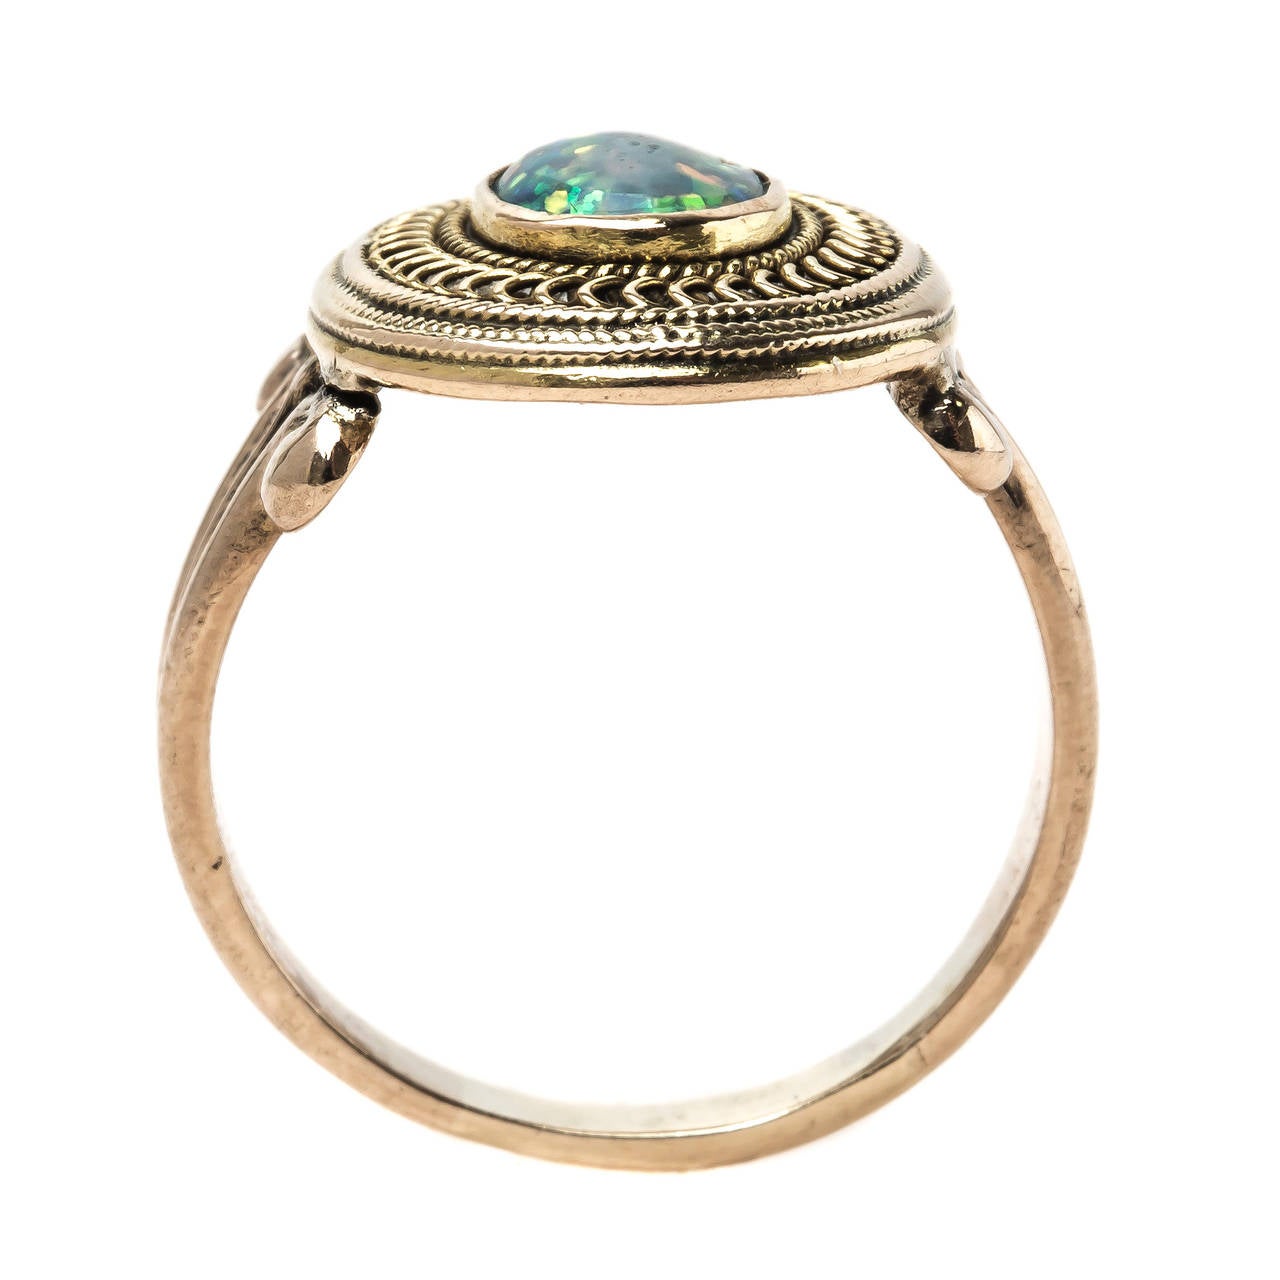 Women's Victorian Era Black Cabochon Opal Cocktail Ring with Rope Motif